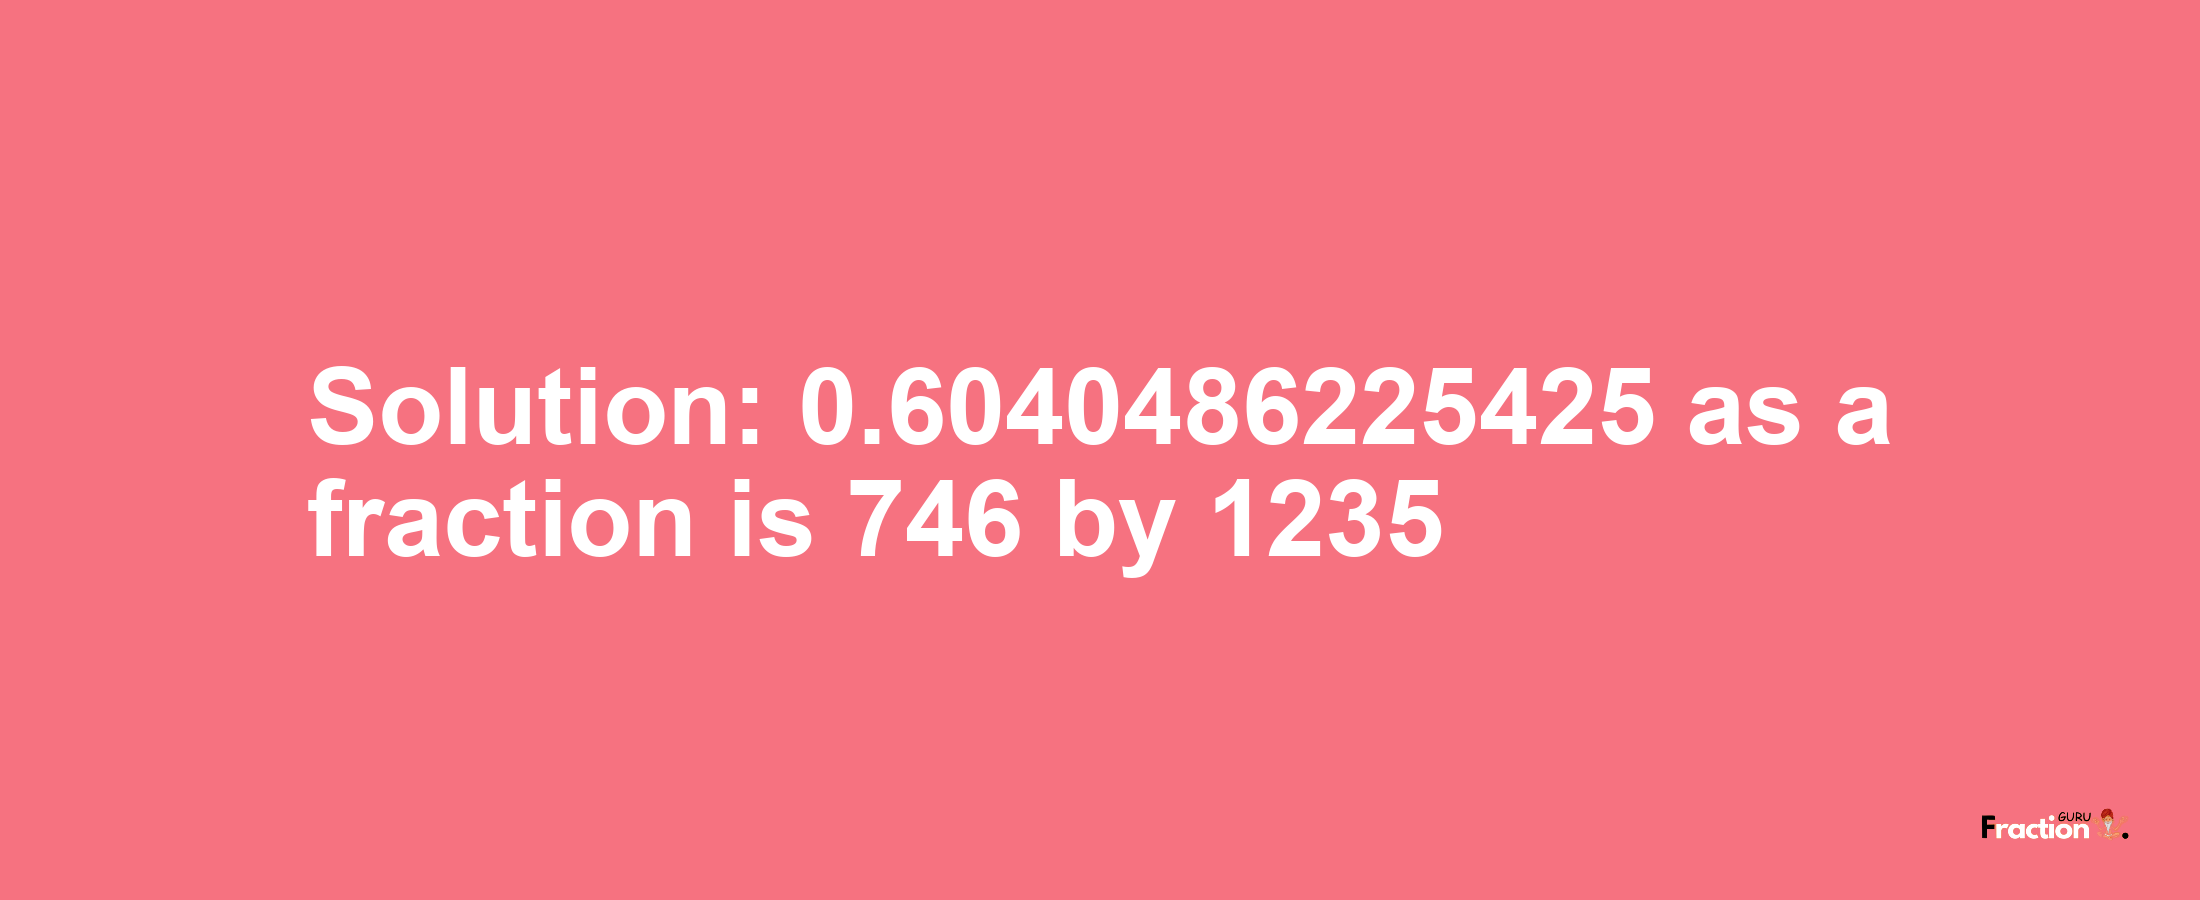 Solution:0.6040486225425 as a fraction is 746/1235